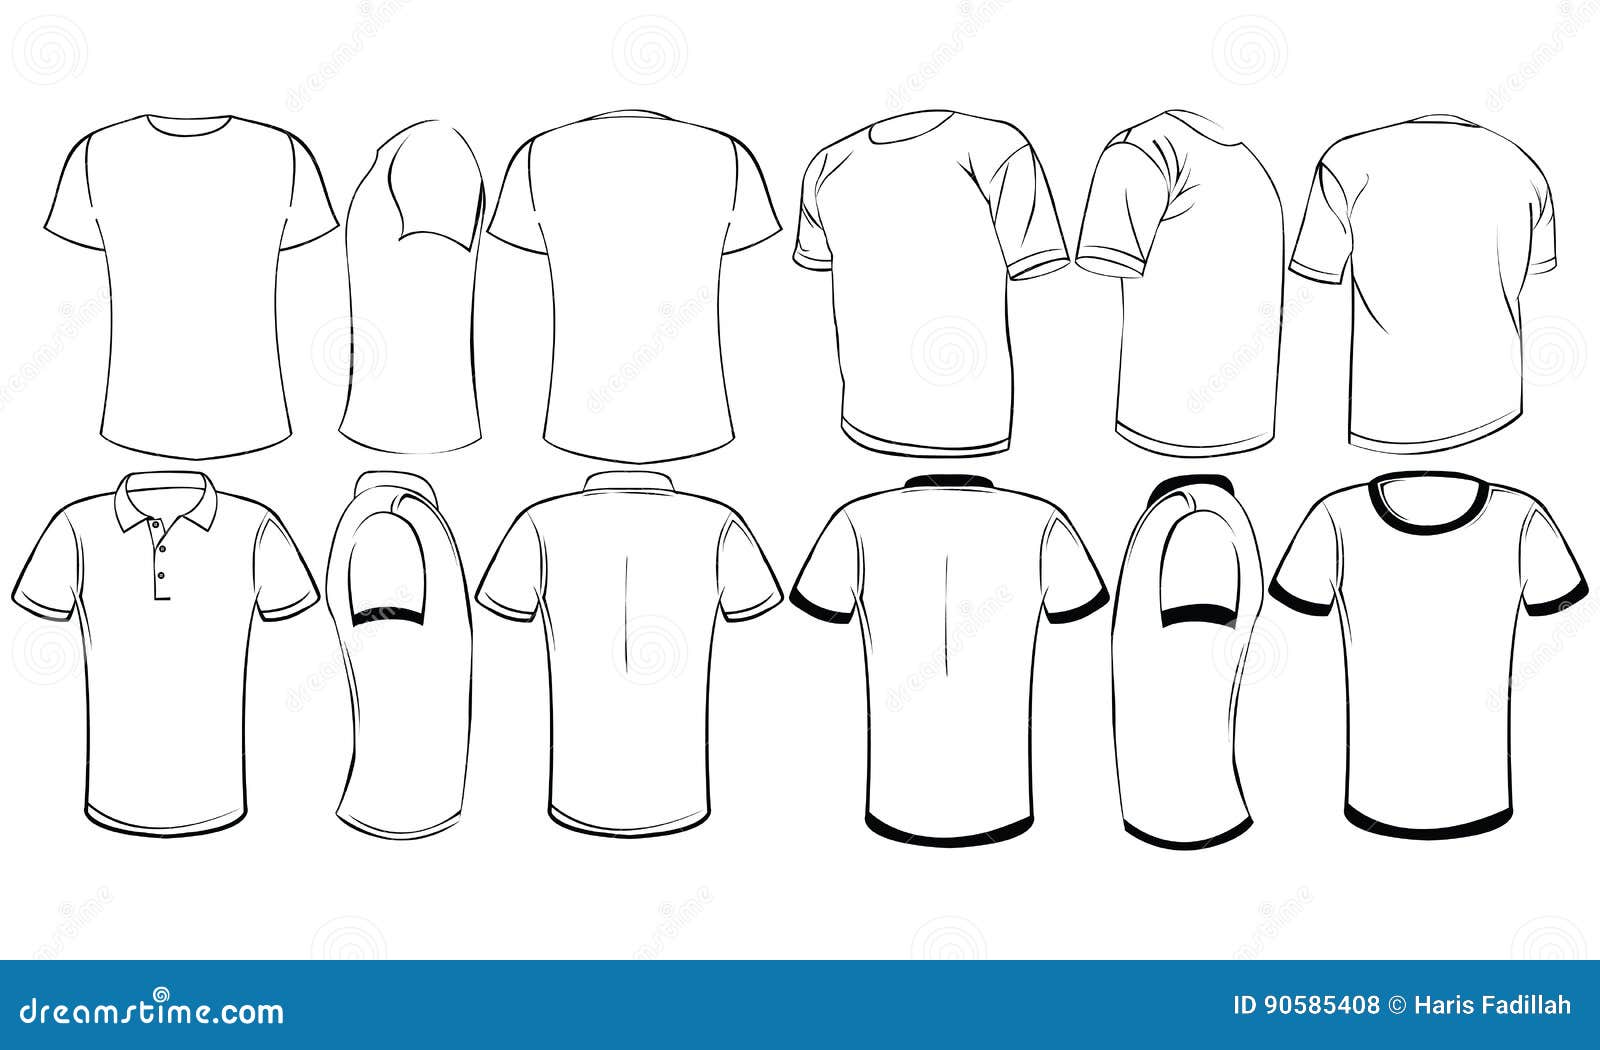 Shirt stock vector. Illustration of posing, collections - 90585408